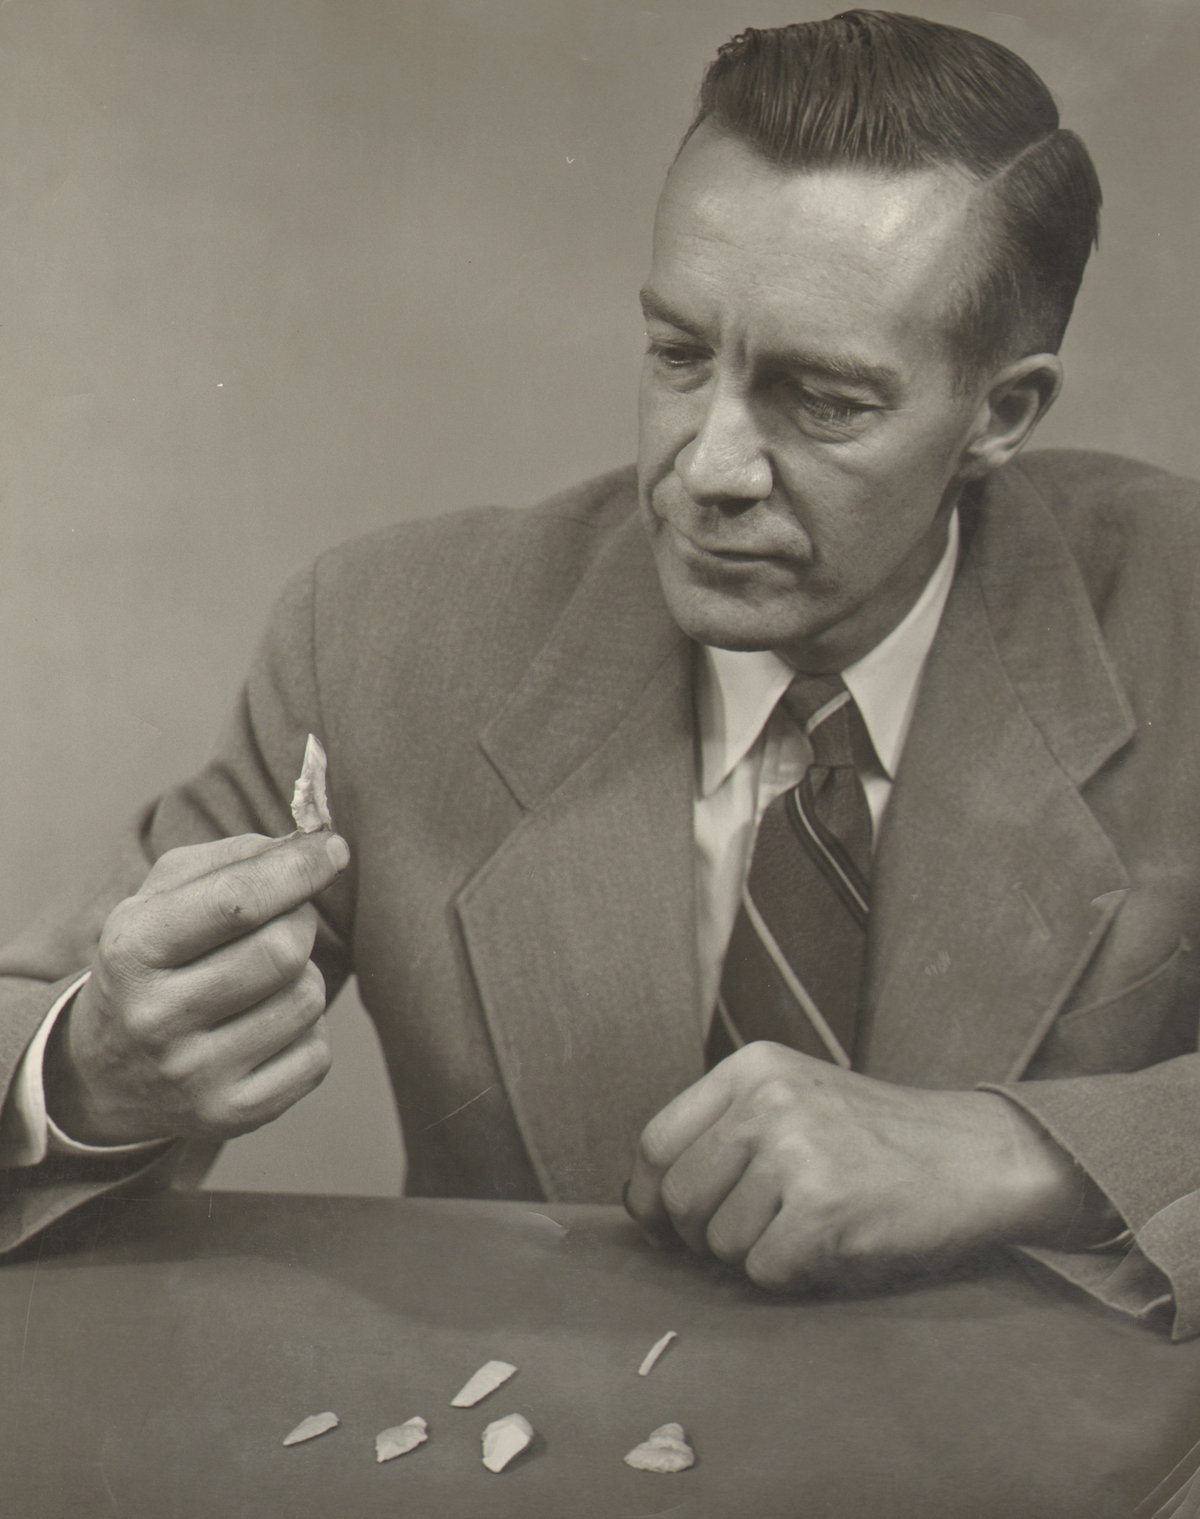 A wearing a suit and tie sits at a table while examining a shaped stone point. Other stone points and tools sit on the table.